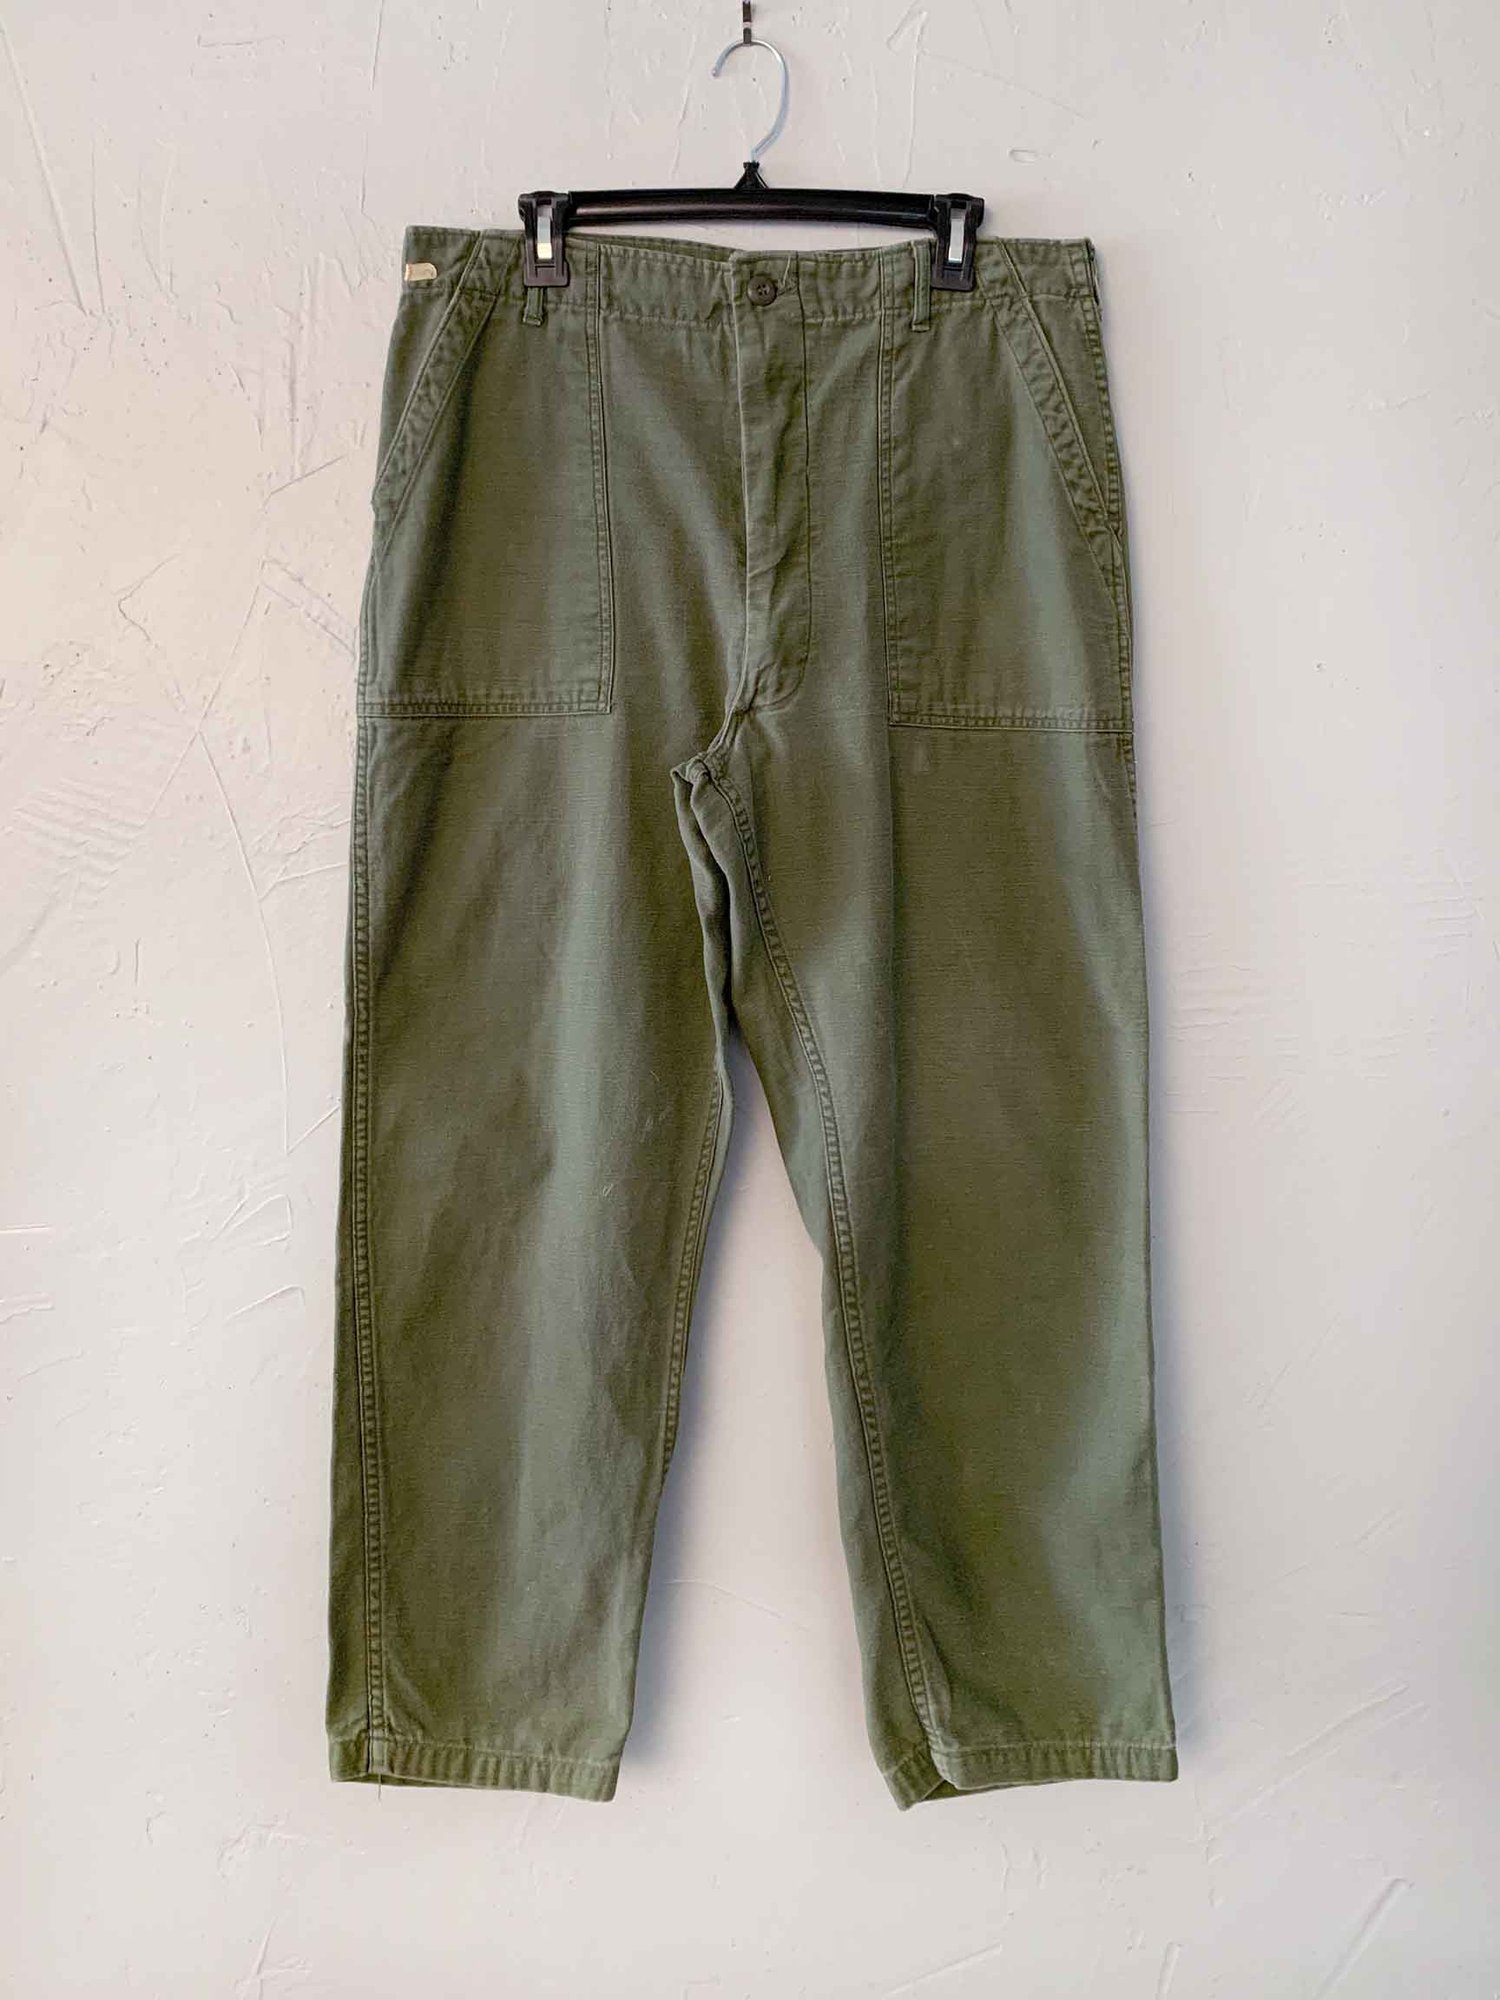 Image of Vintage '70s US Army OG-107 Military Utility Trousers - Made in USA - 38x31 - #2